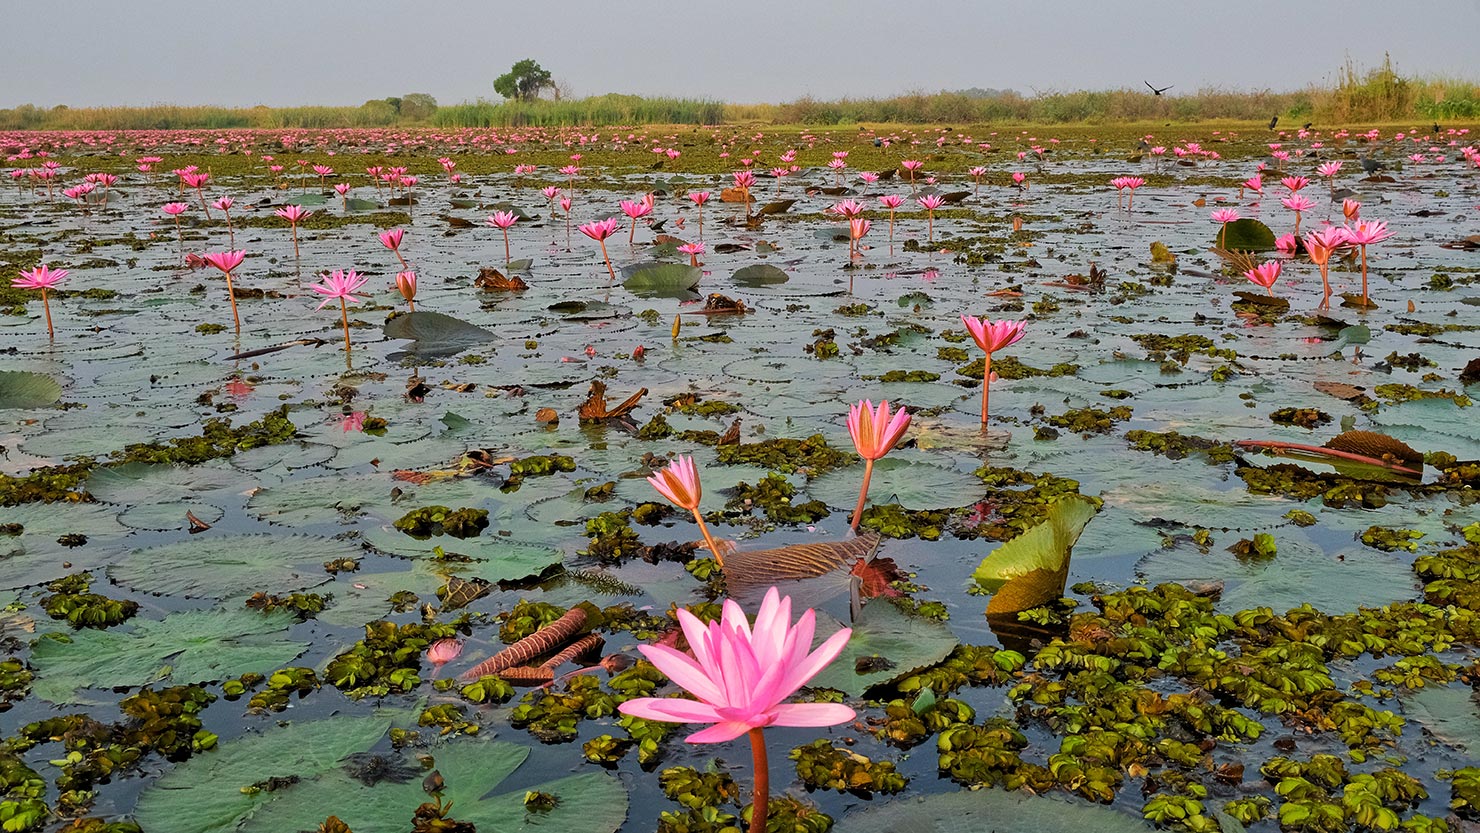 Vista of the Red Lotus Lake with gorgeous pink lilies